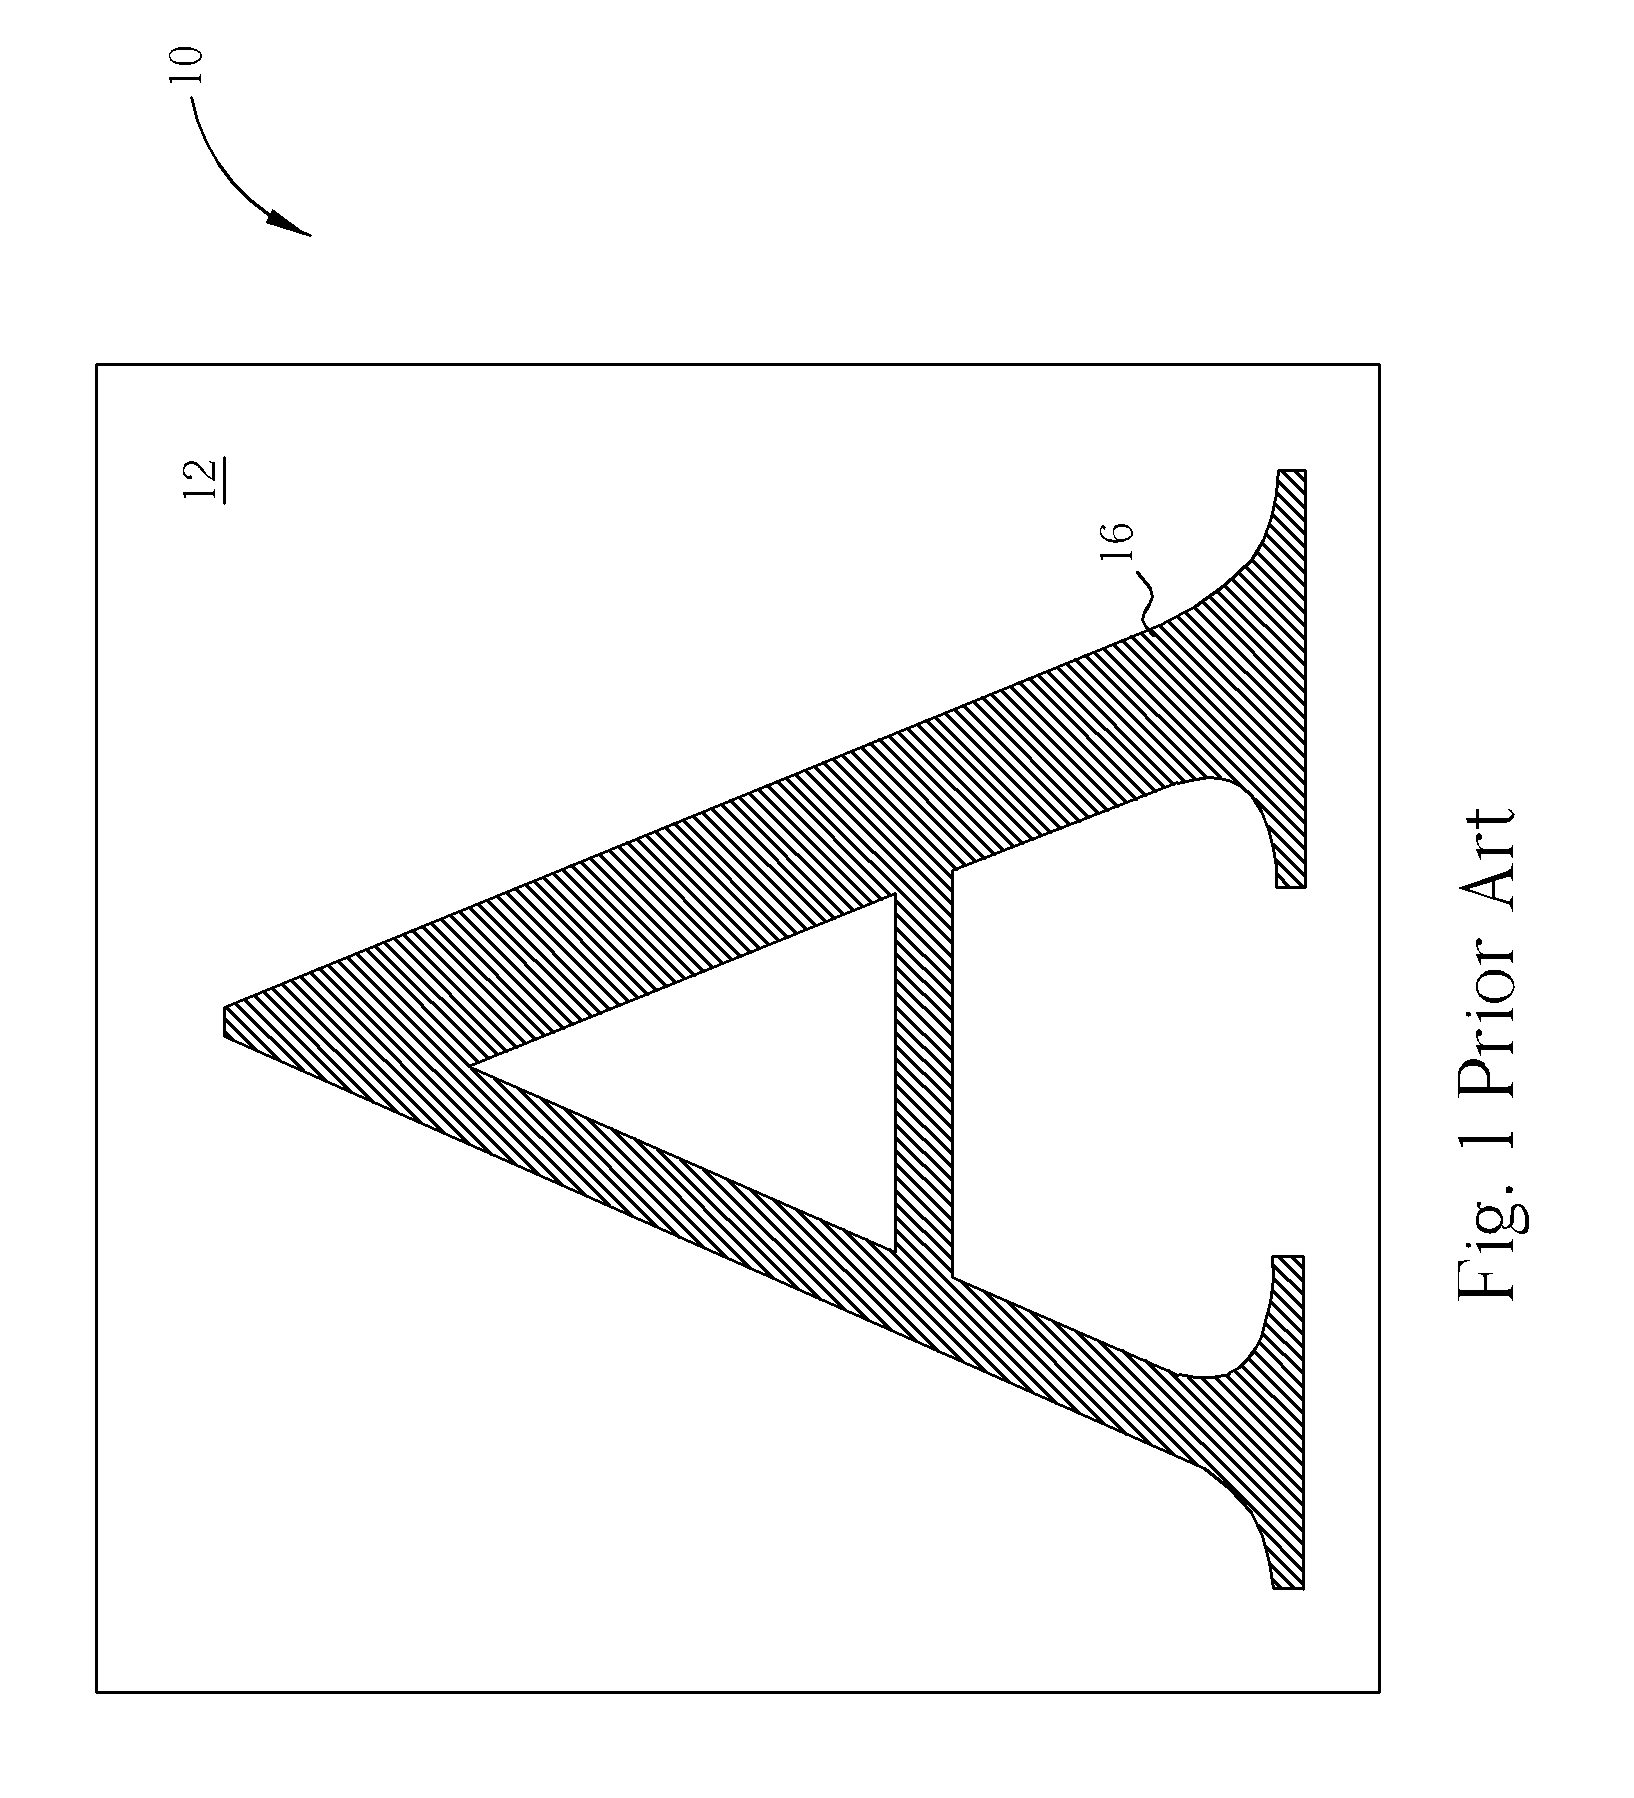 Method for Duplex Scanning and Generating Corresponding Images